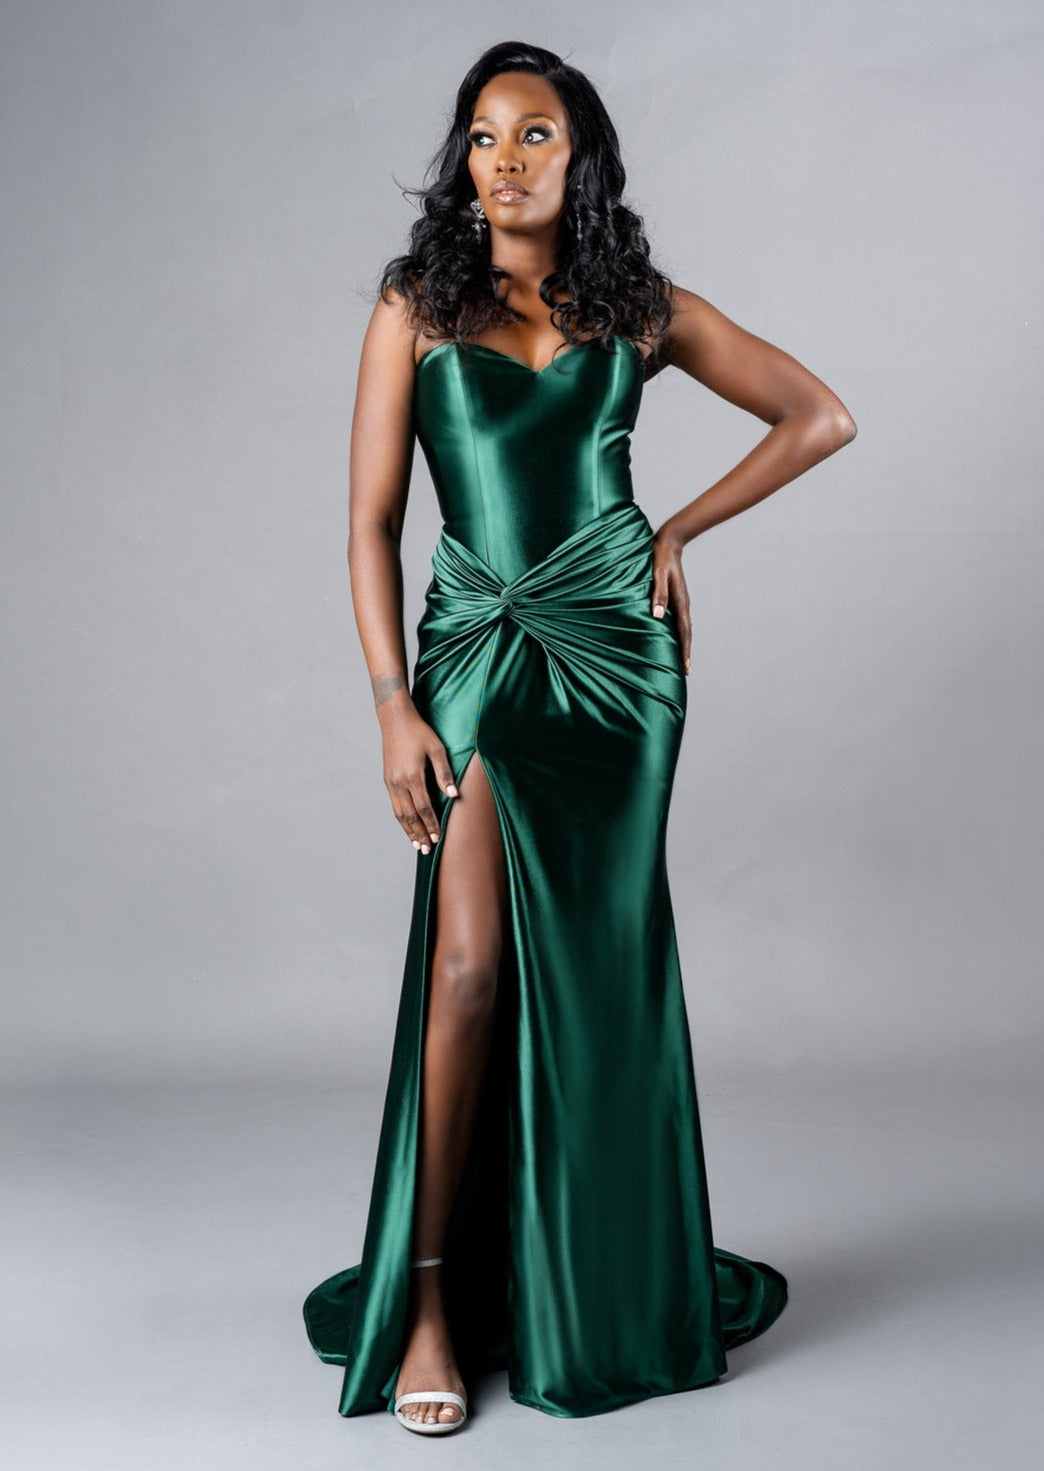 Curvy Bridesmaid wearing a strapless fitted bridesmaids dress with stretch. Dress has a slit at the leg, twisted detailing at the hip, and is shown in emerald green on a black model.